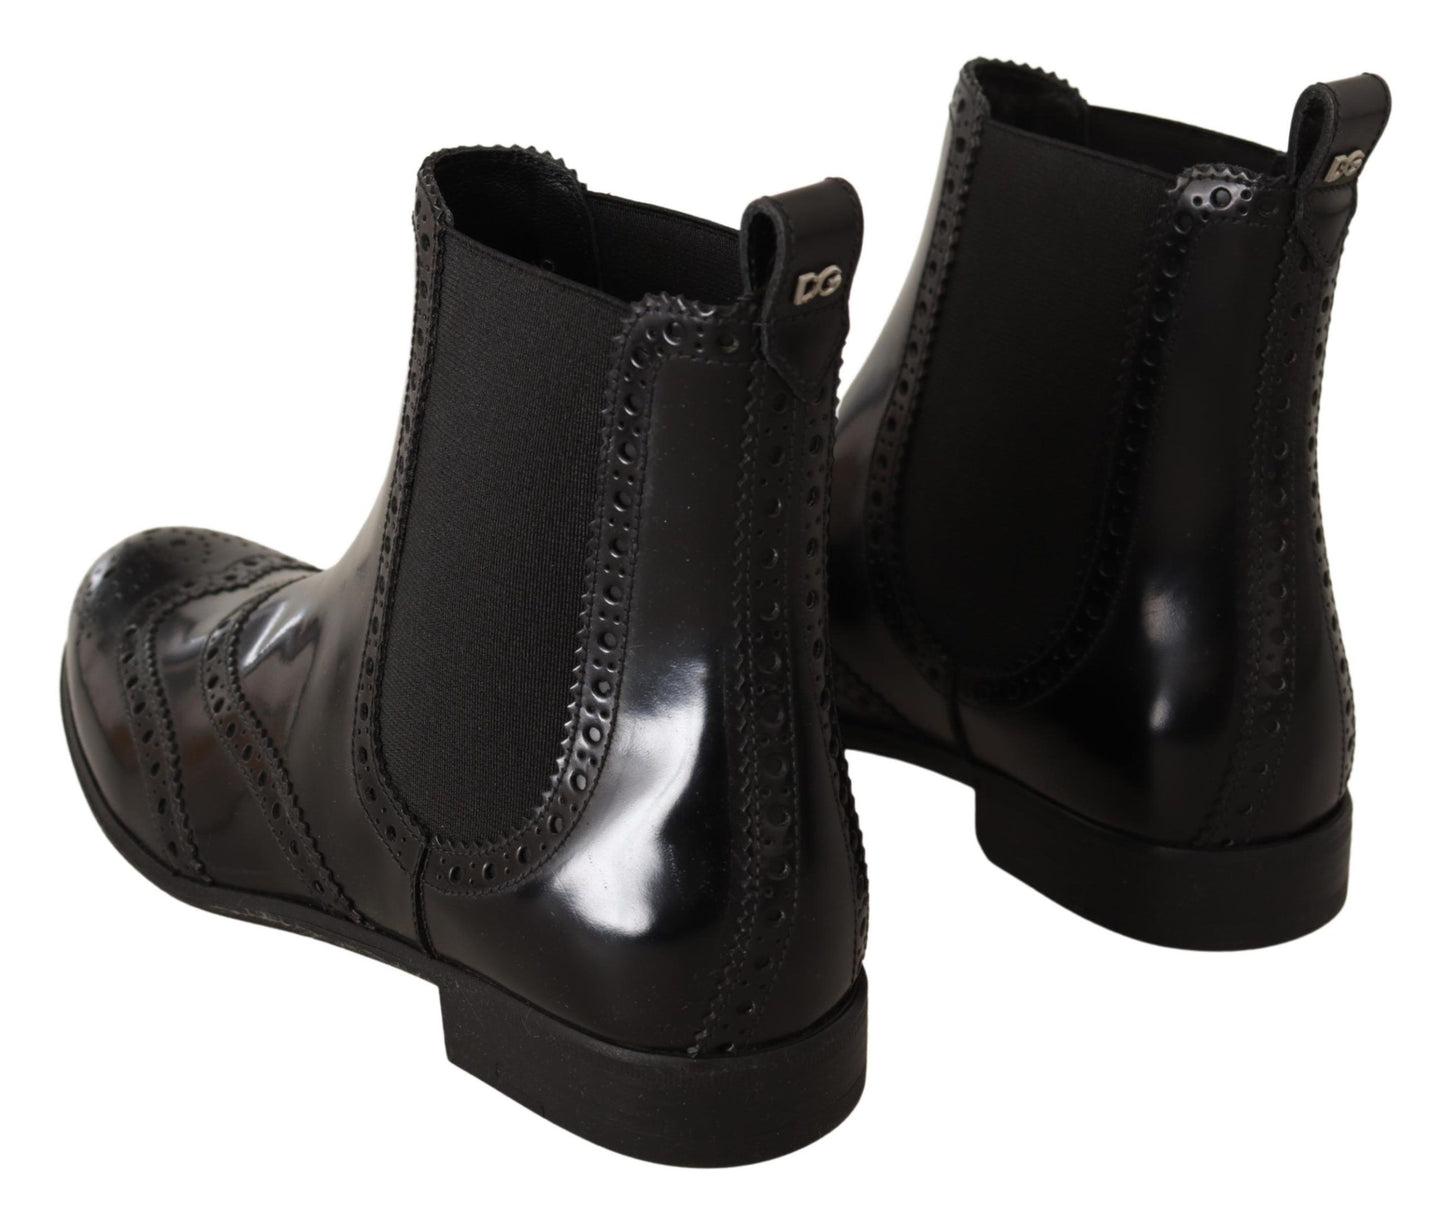 Dolce & Gabbana Black Leather Ankle High Flat Boots Shoes